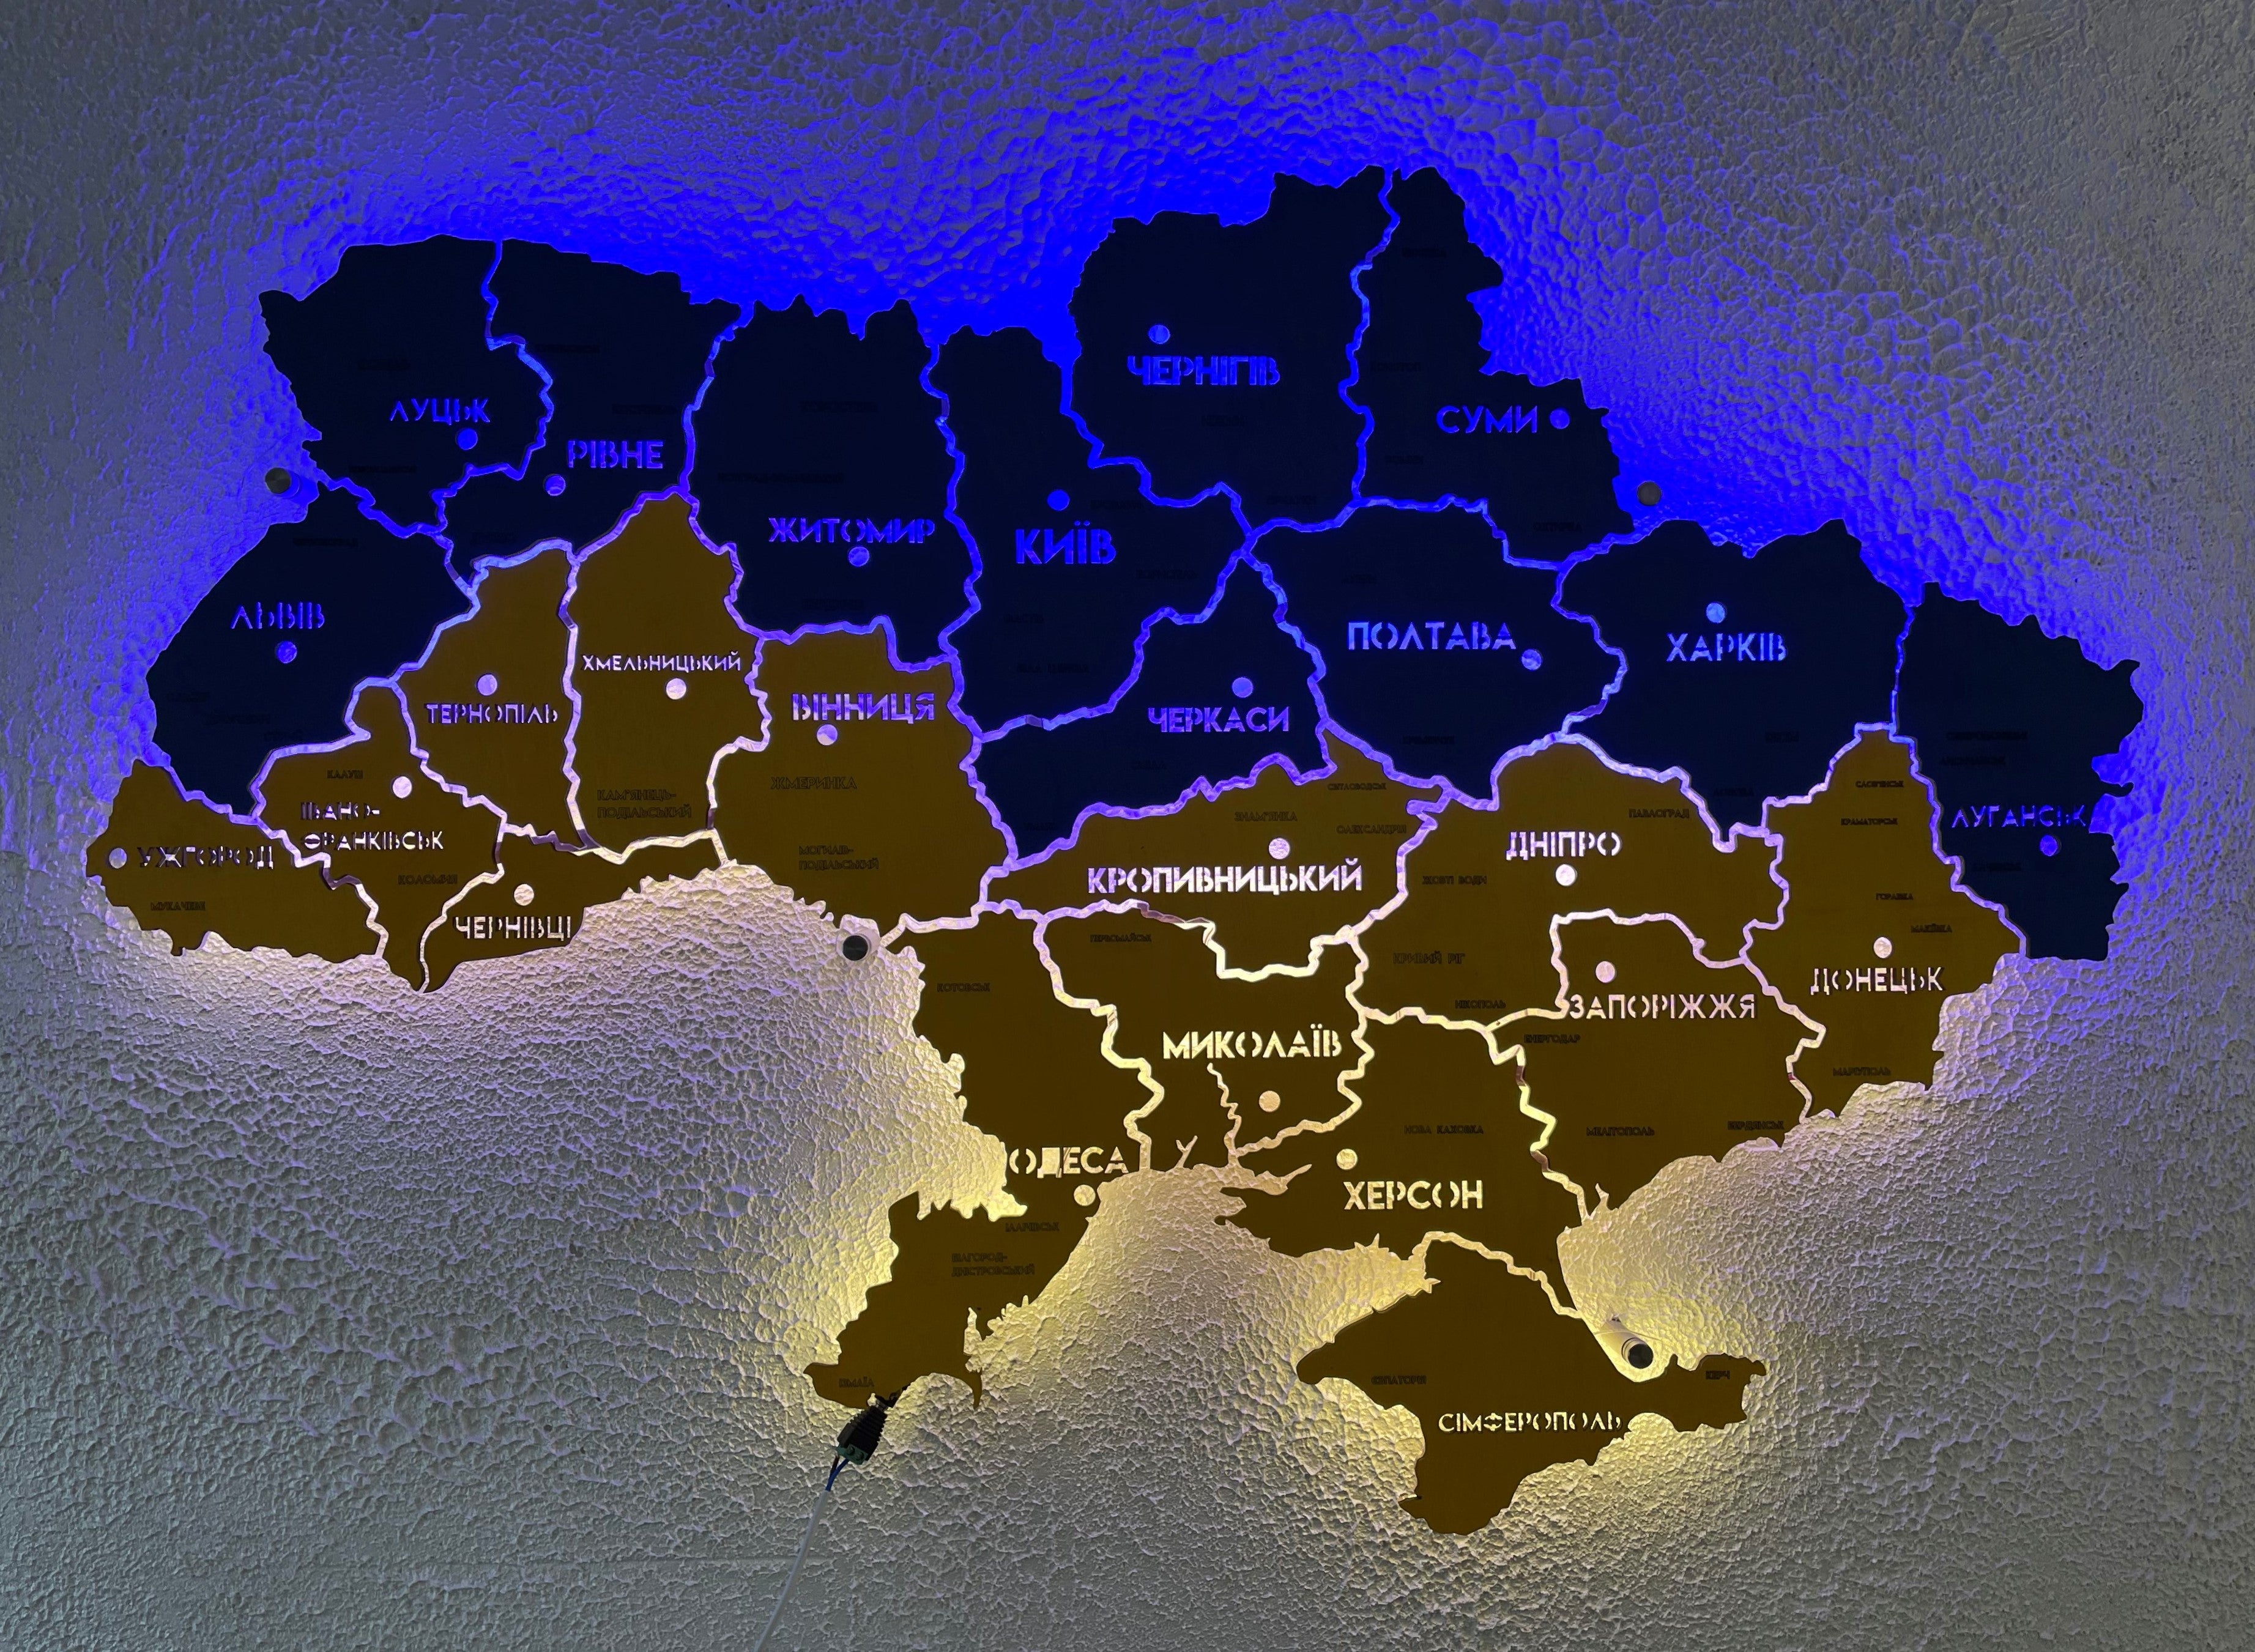 ukraine-led-map-on-acrylic-glass-with-backlighting-between-regions-color-flag-1